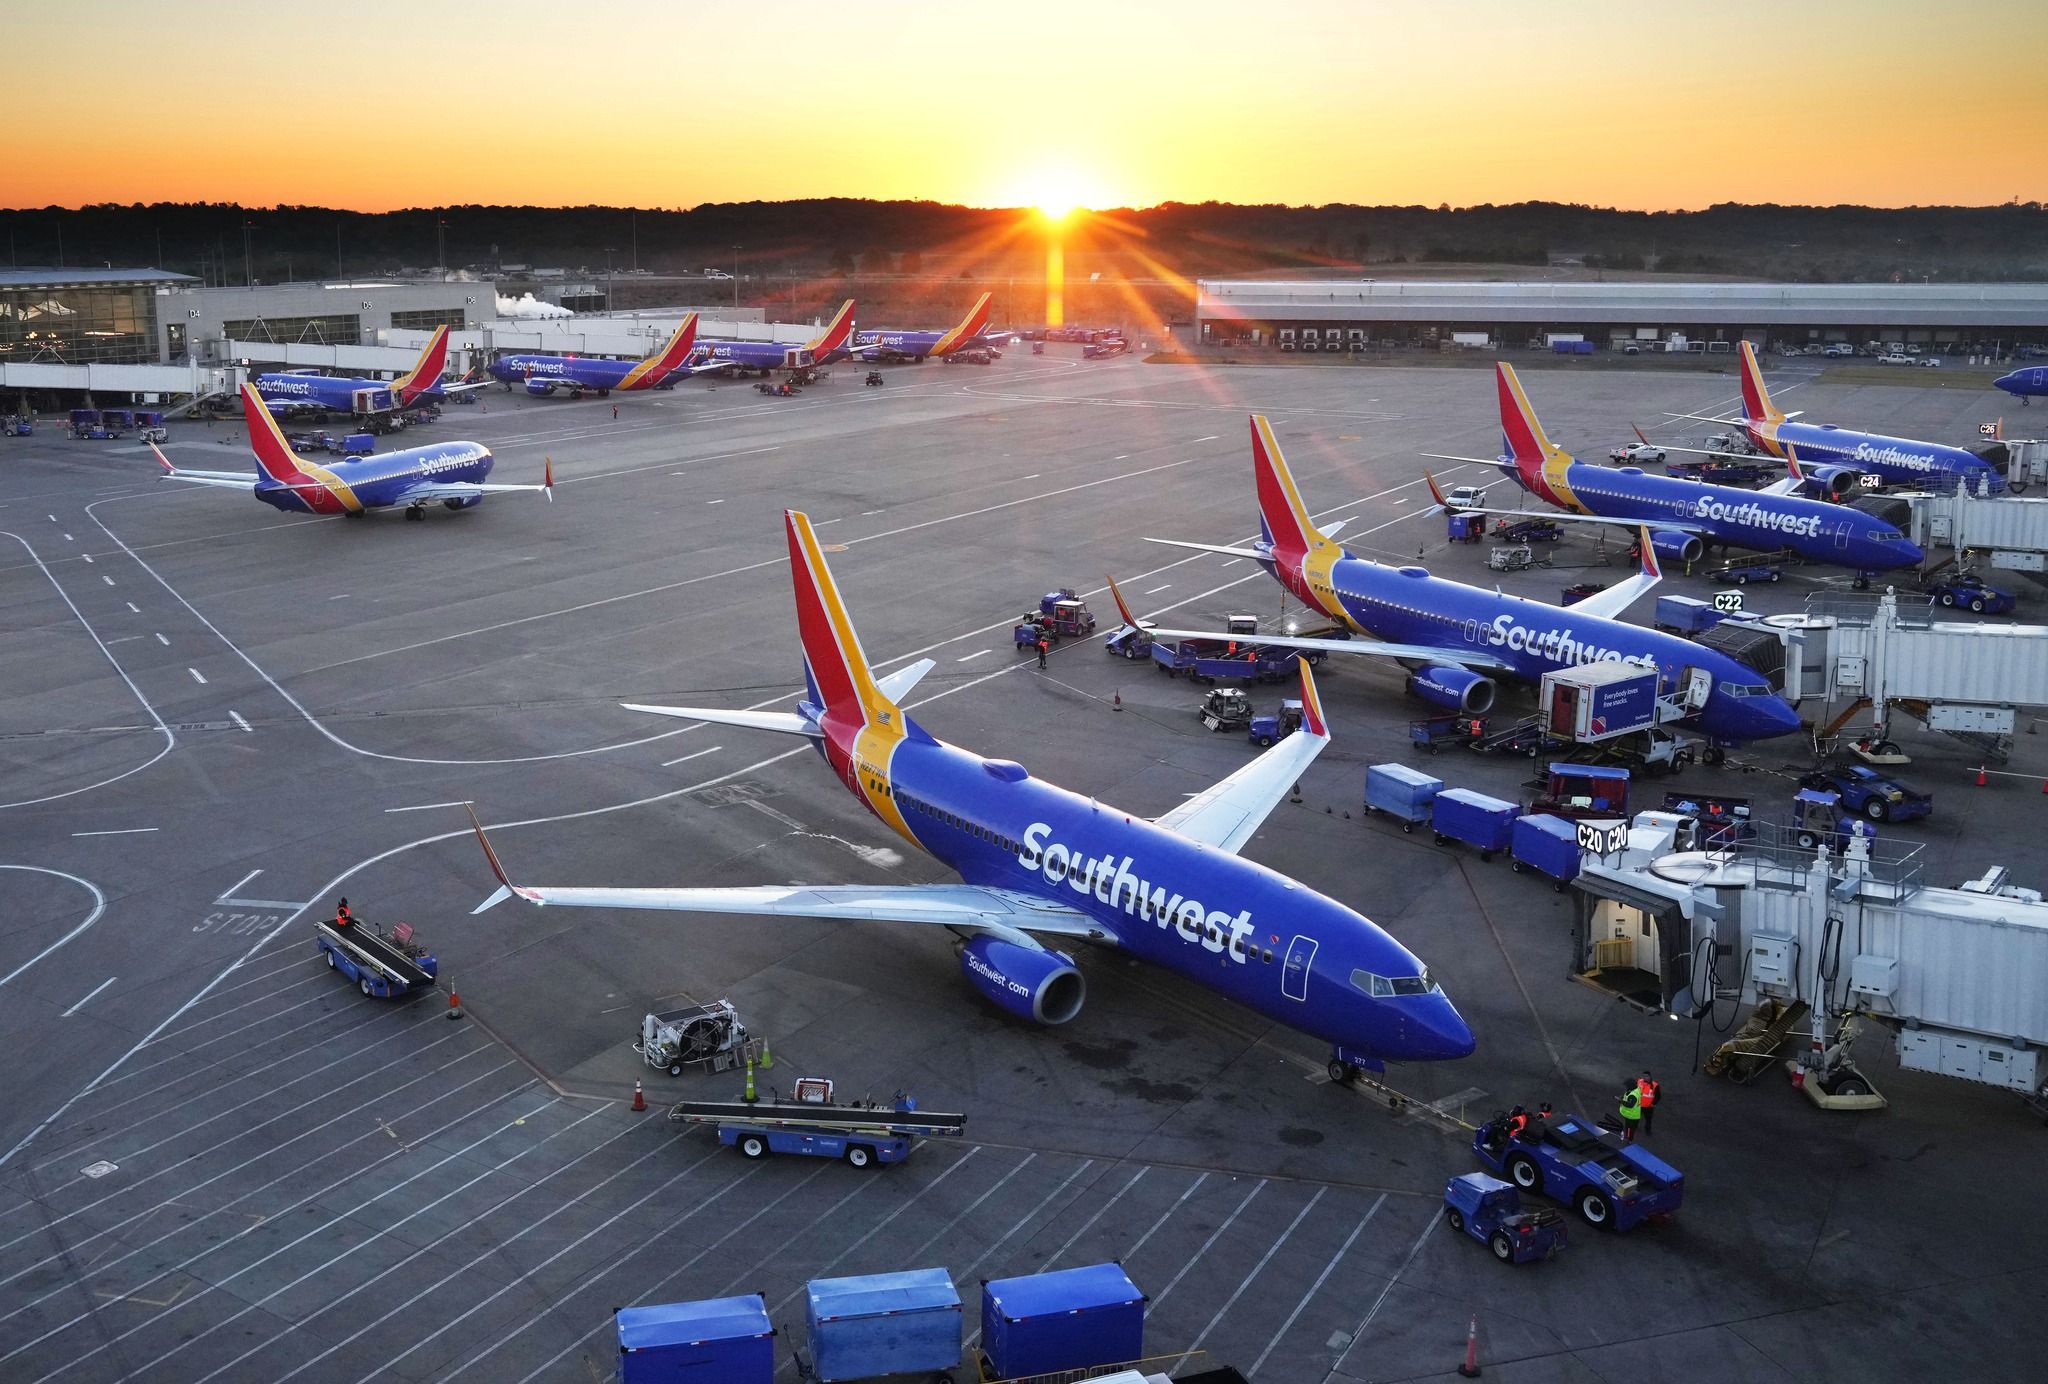 Several Southwest Airlines Boeing 737 aircraft on the apron at Nashville International Airport.